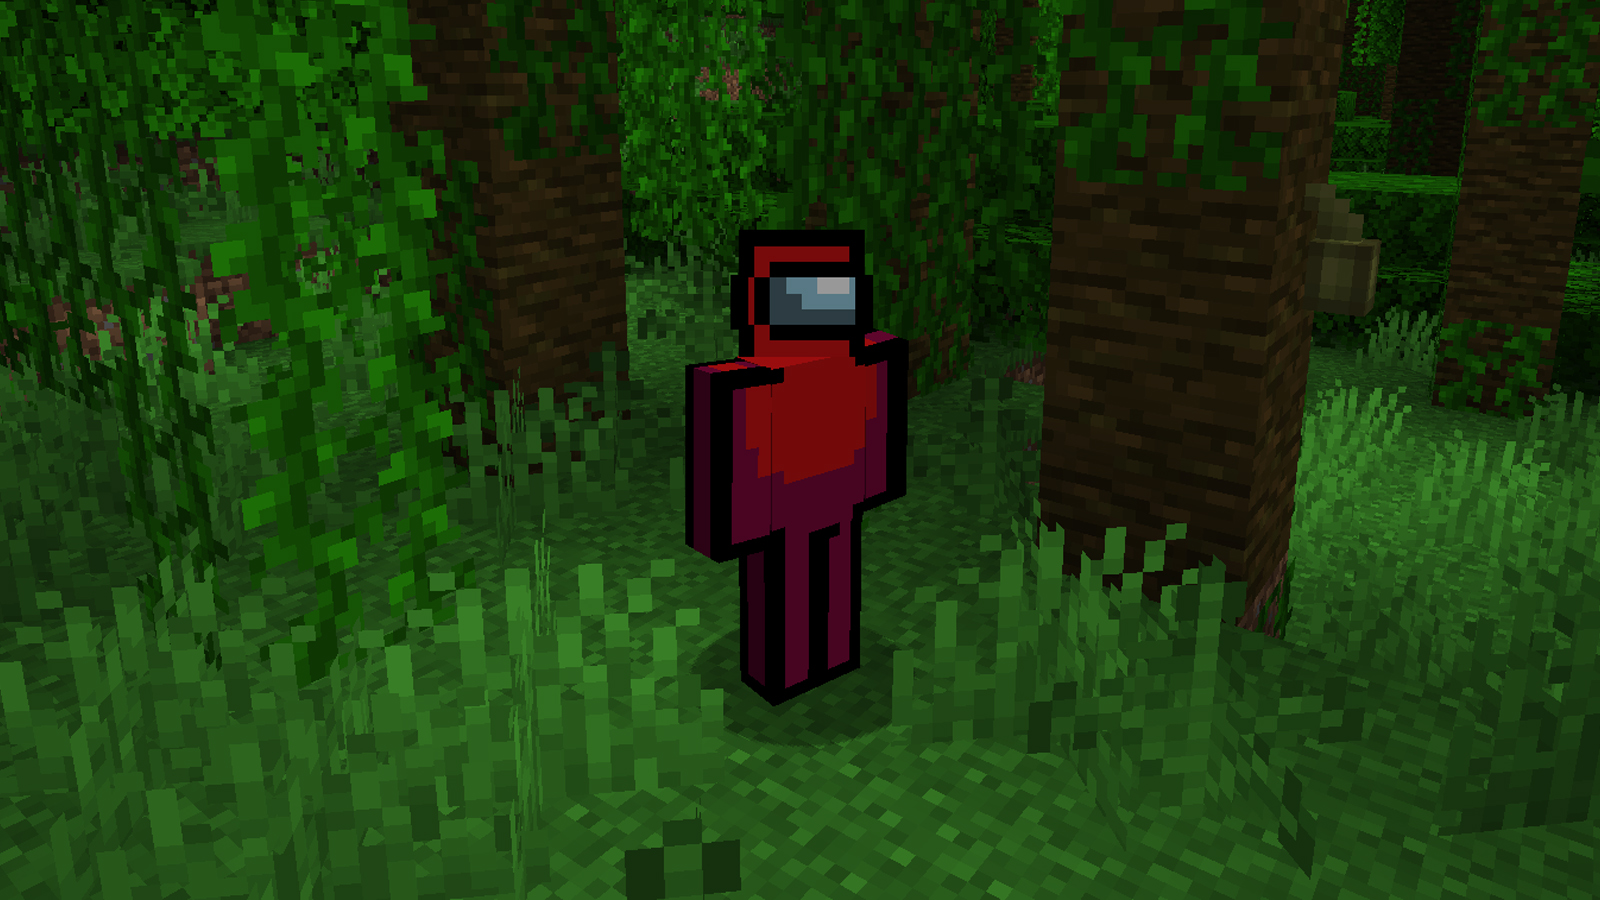 Best Minecraft skins - A player wearing a skin inspired by the Among Us crewmembers stands in the woods.